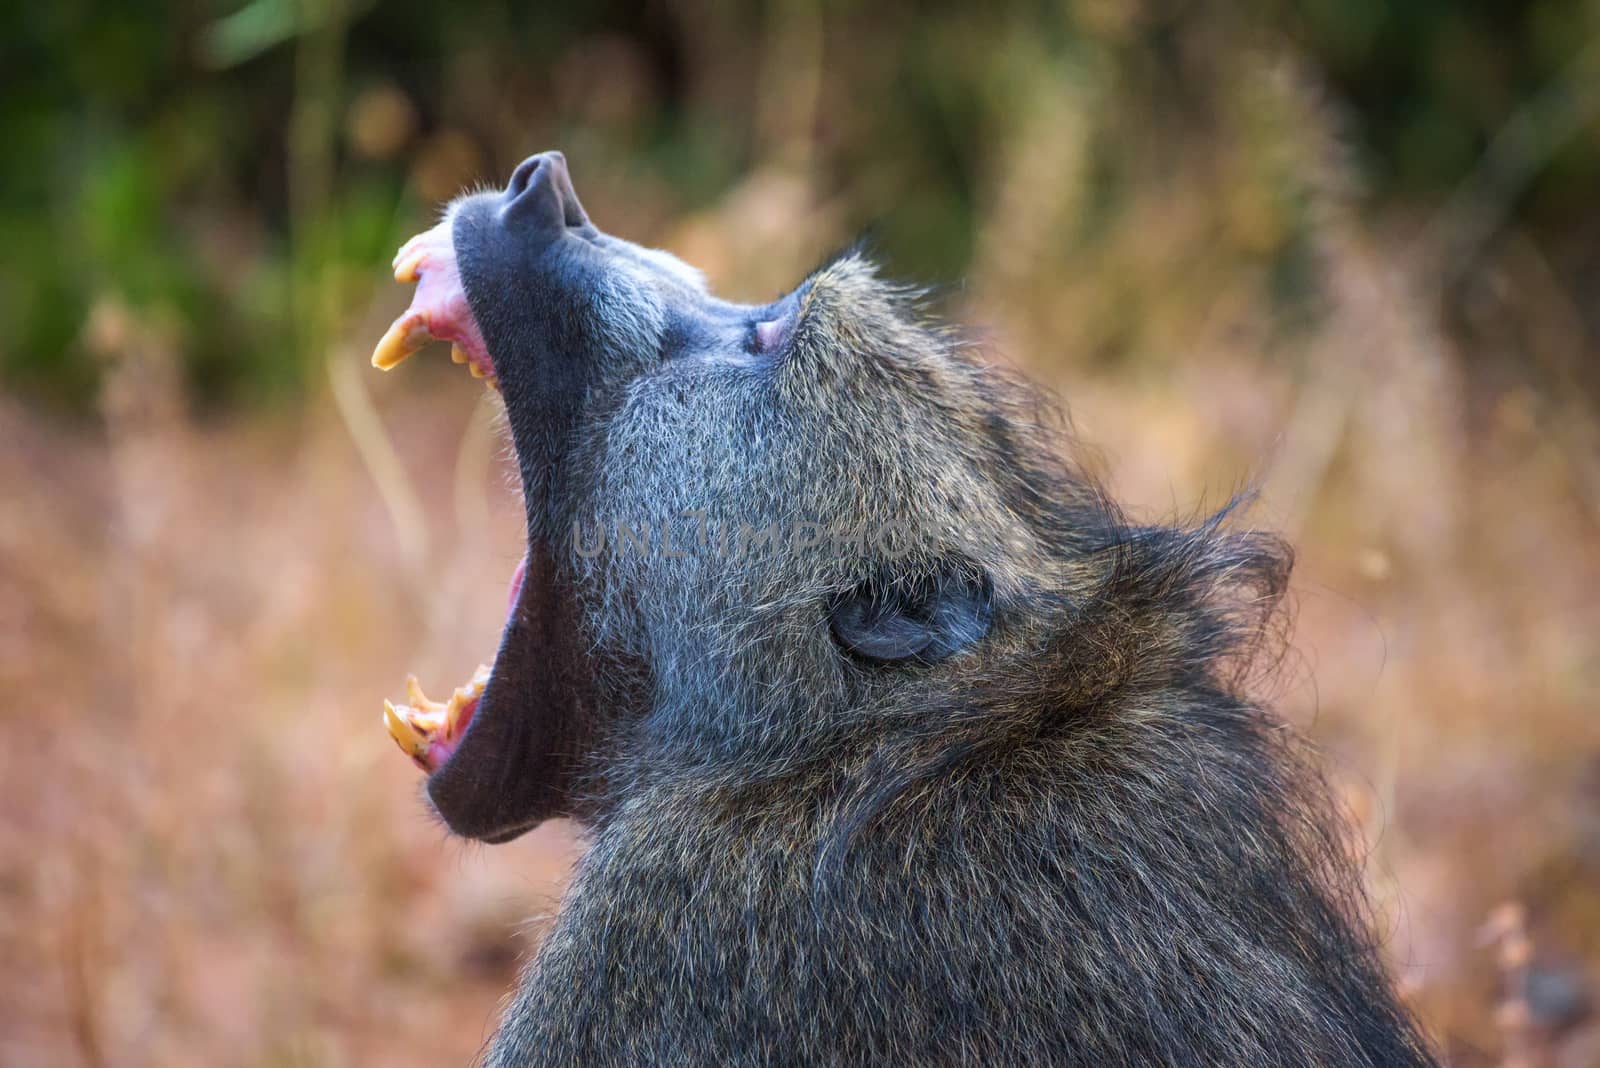 Chacma baboon monkey yawning and showing teeth in the Chobe National Park, Botswana